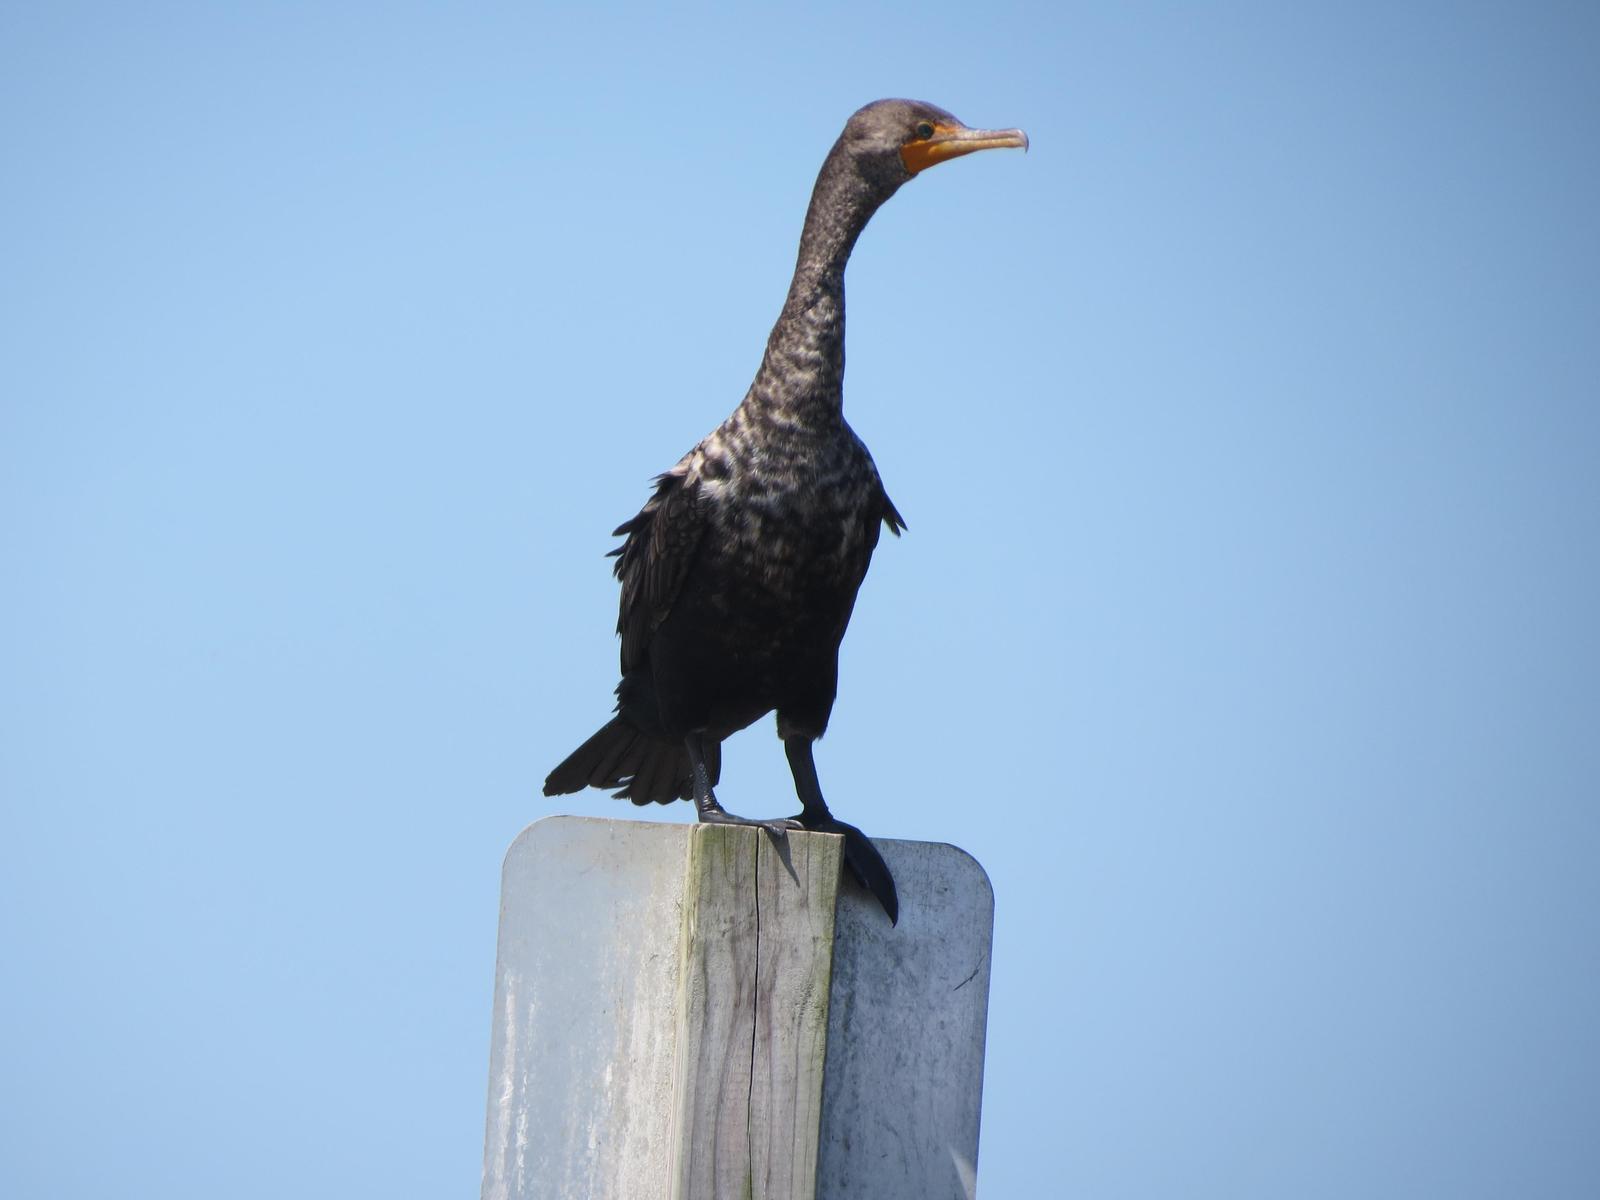 Double-crested Cormorant Photo by Nolan Keyes